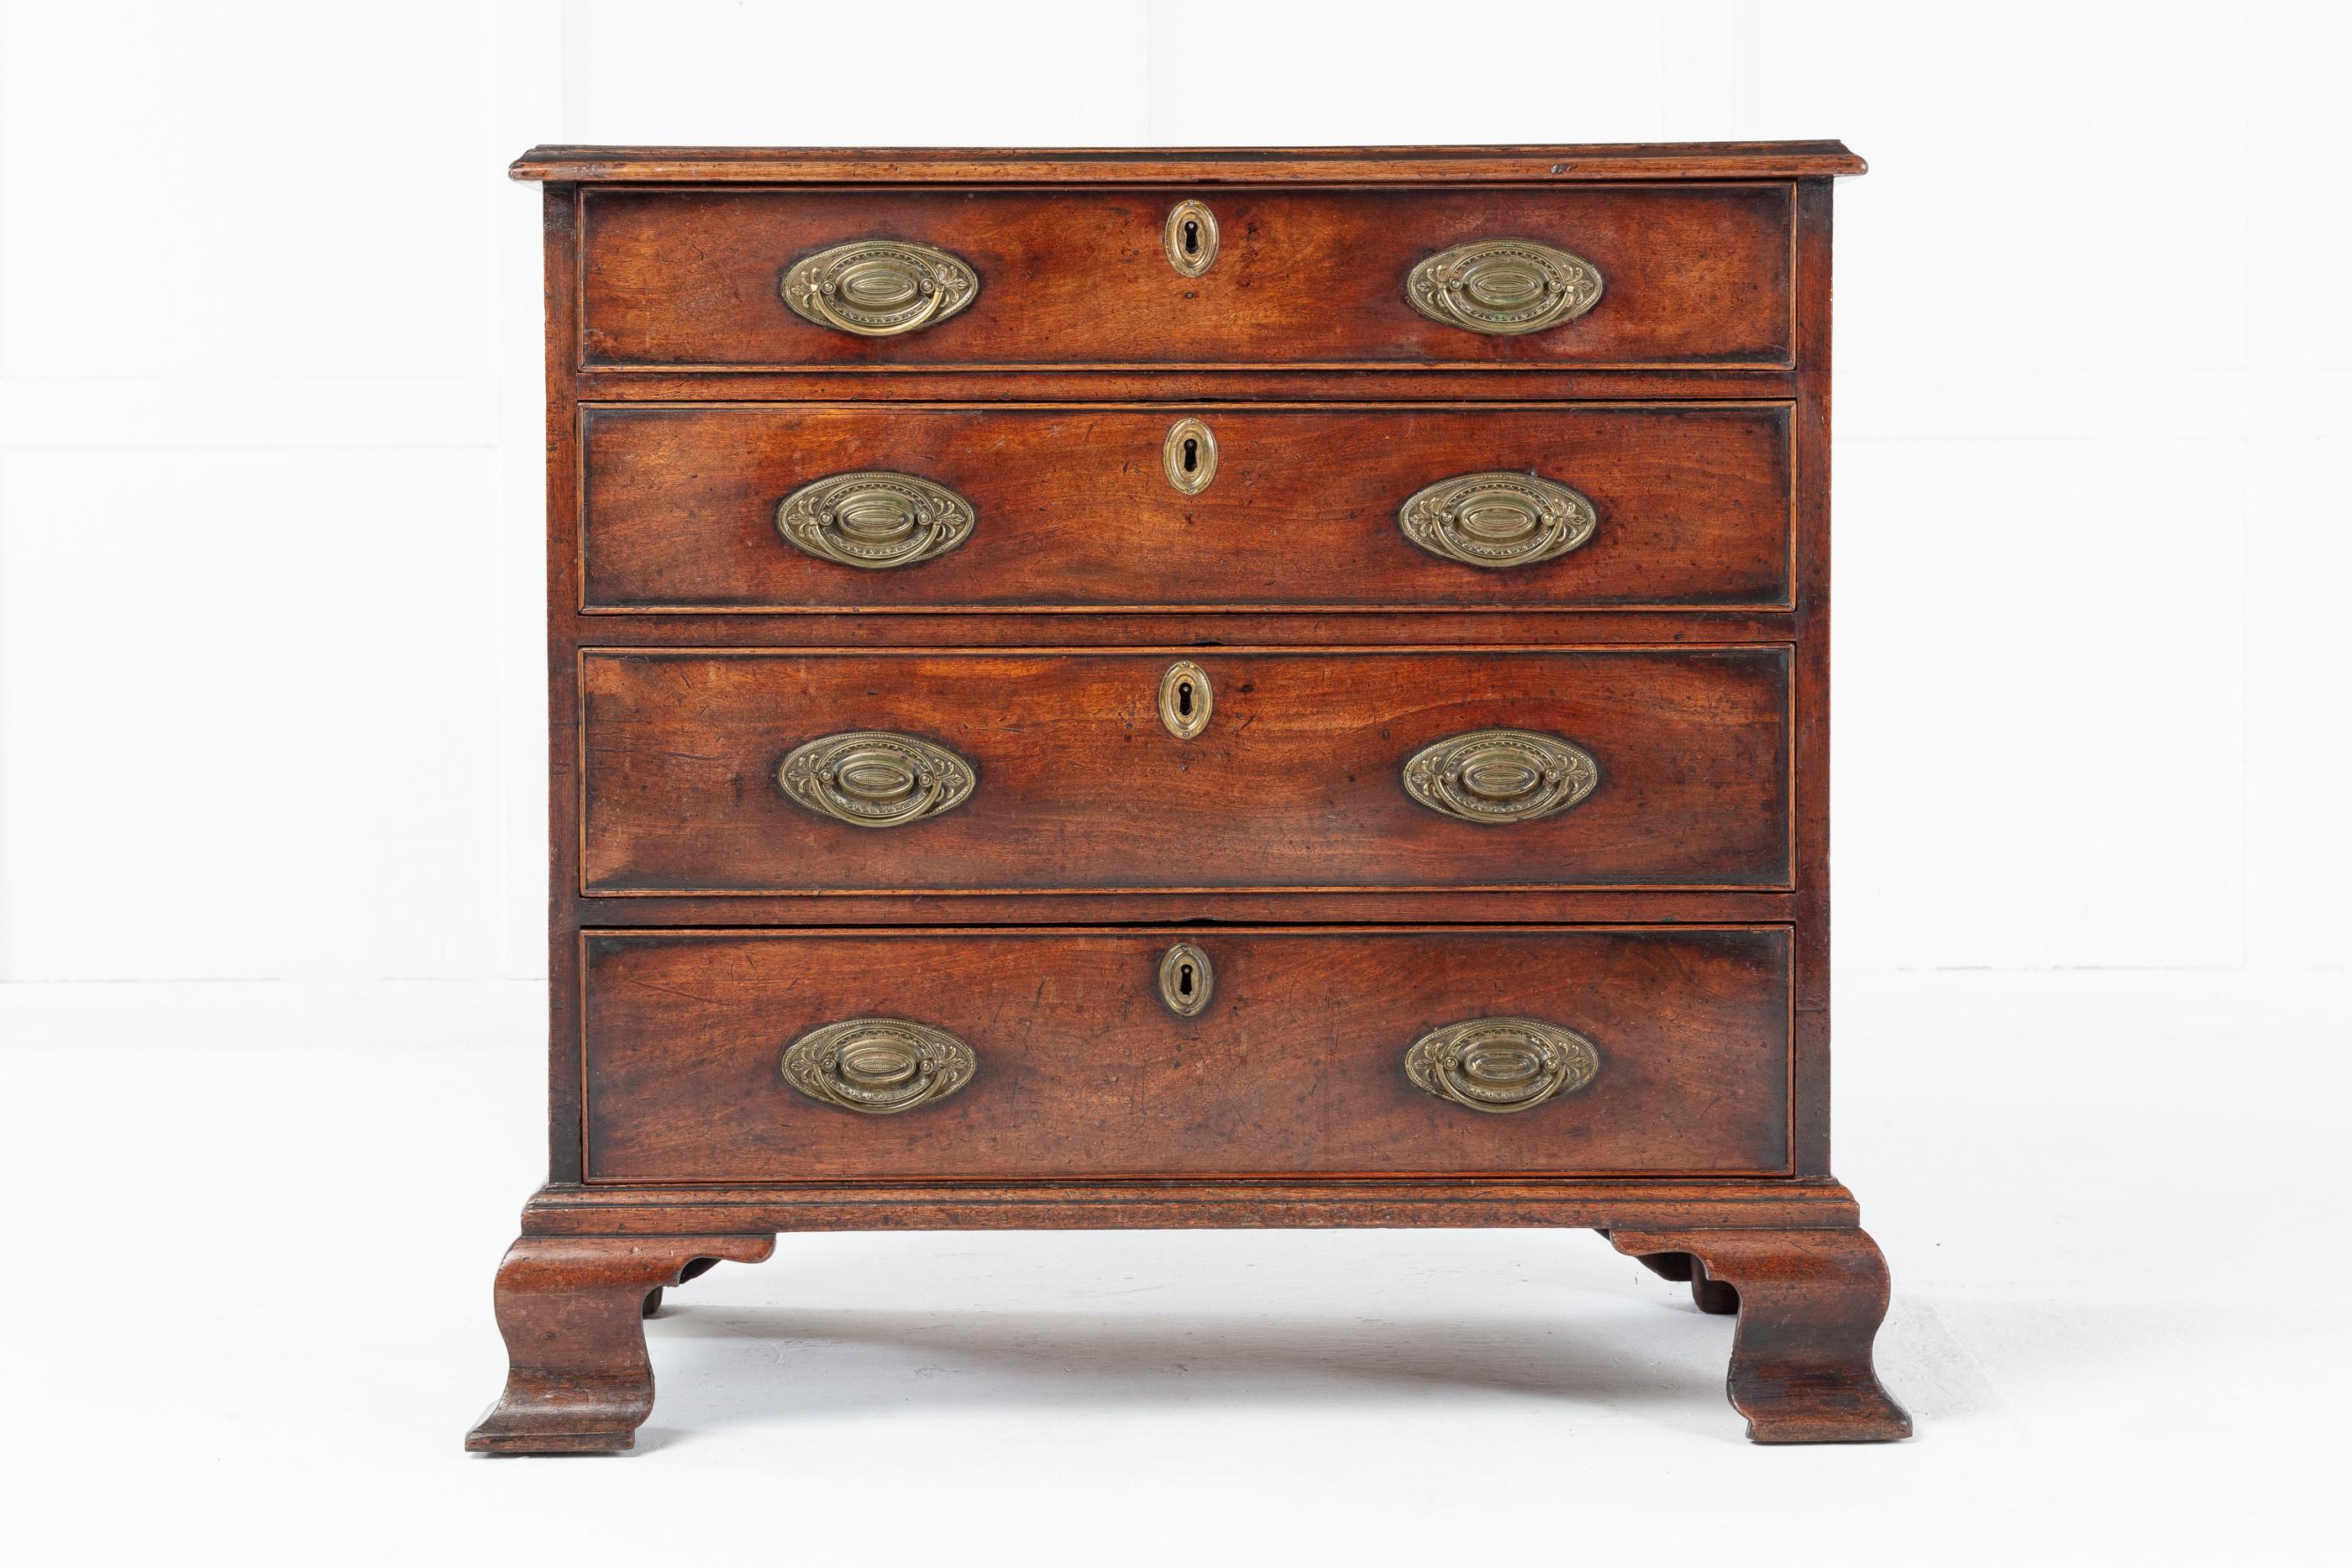 18th century English mahogany chest of drawers with a great shape and oversized ogee feet on all four corners.

A lovely size chest with an exceptional, original colour. Having four long graduating drawers with a nice set of decorative brass